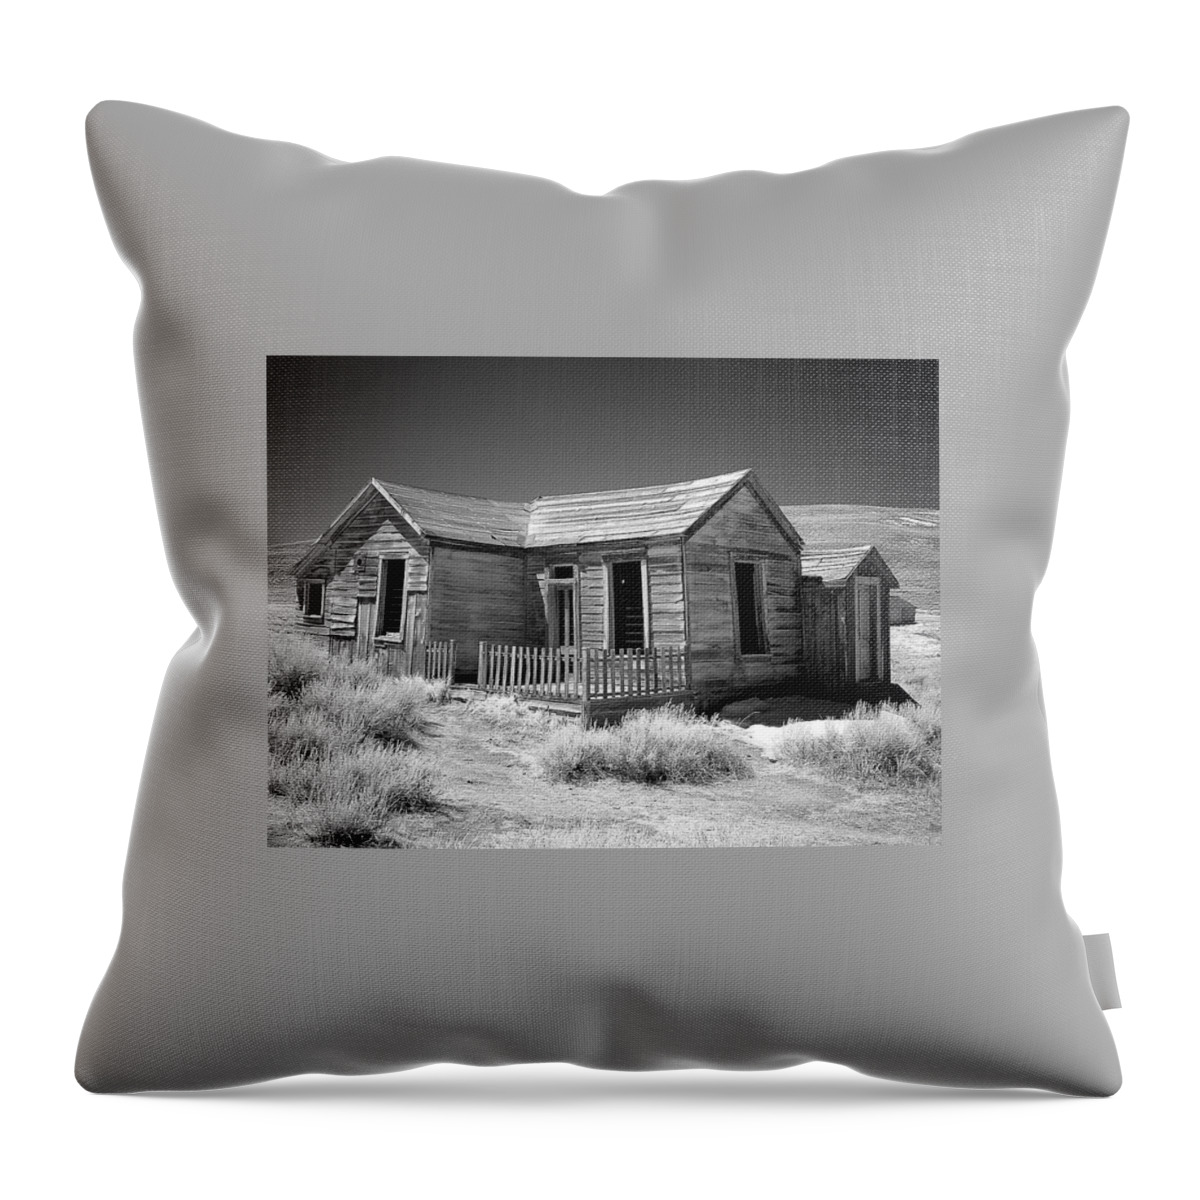 Landscape Throw Pillow featuring the photograph Bodie Starter Home by Duane Middlebusher